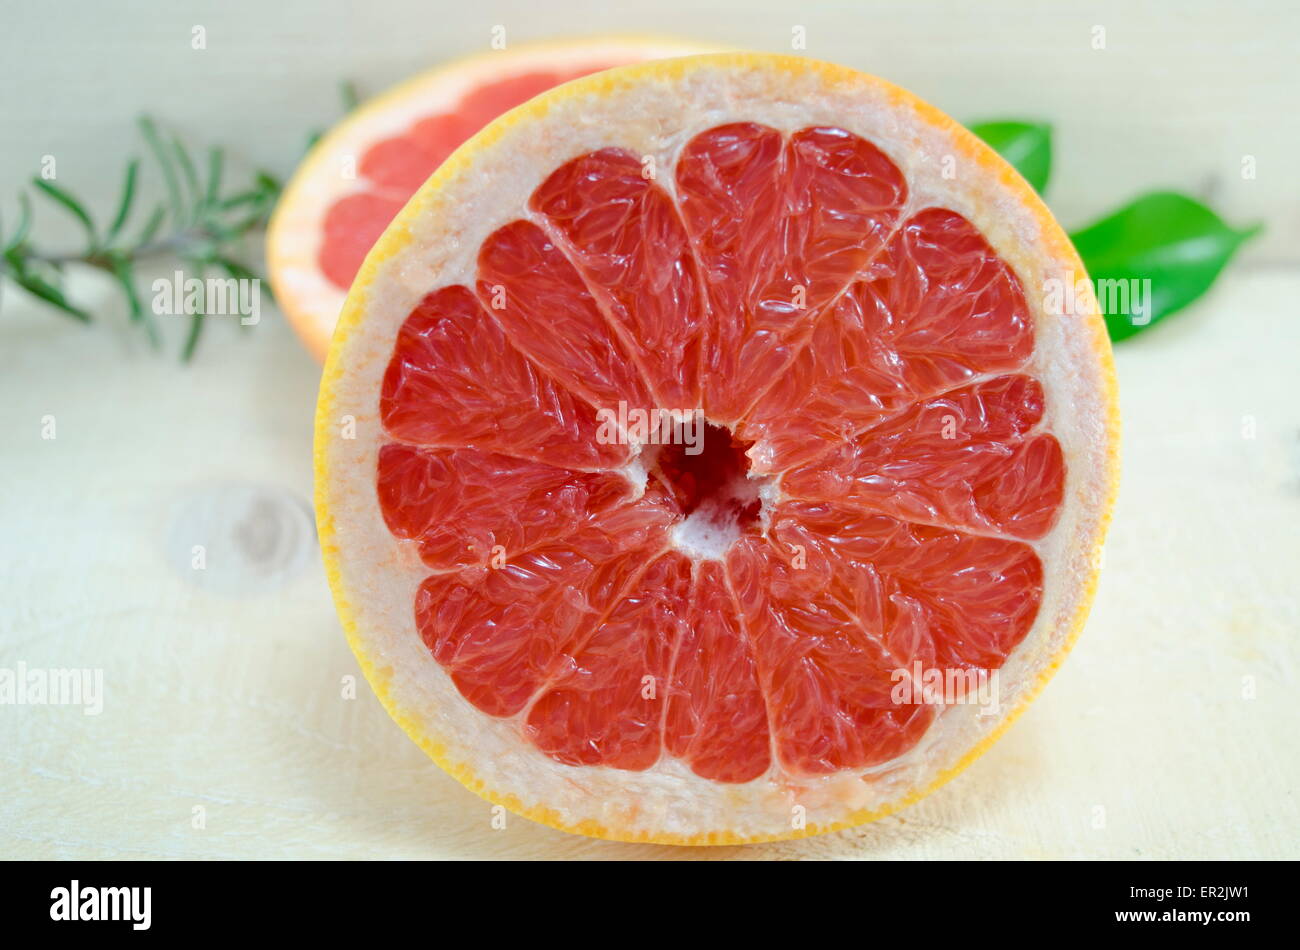 Fresh sliced grapefruit and rosemary branch on a wooden table Stock Photo